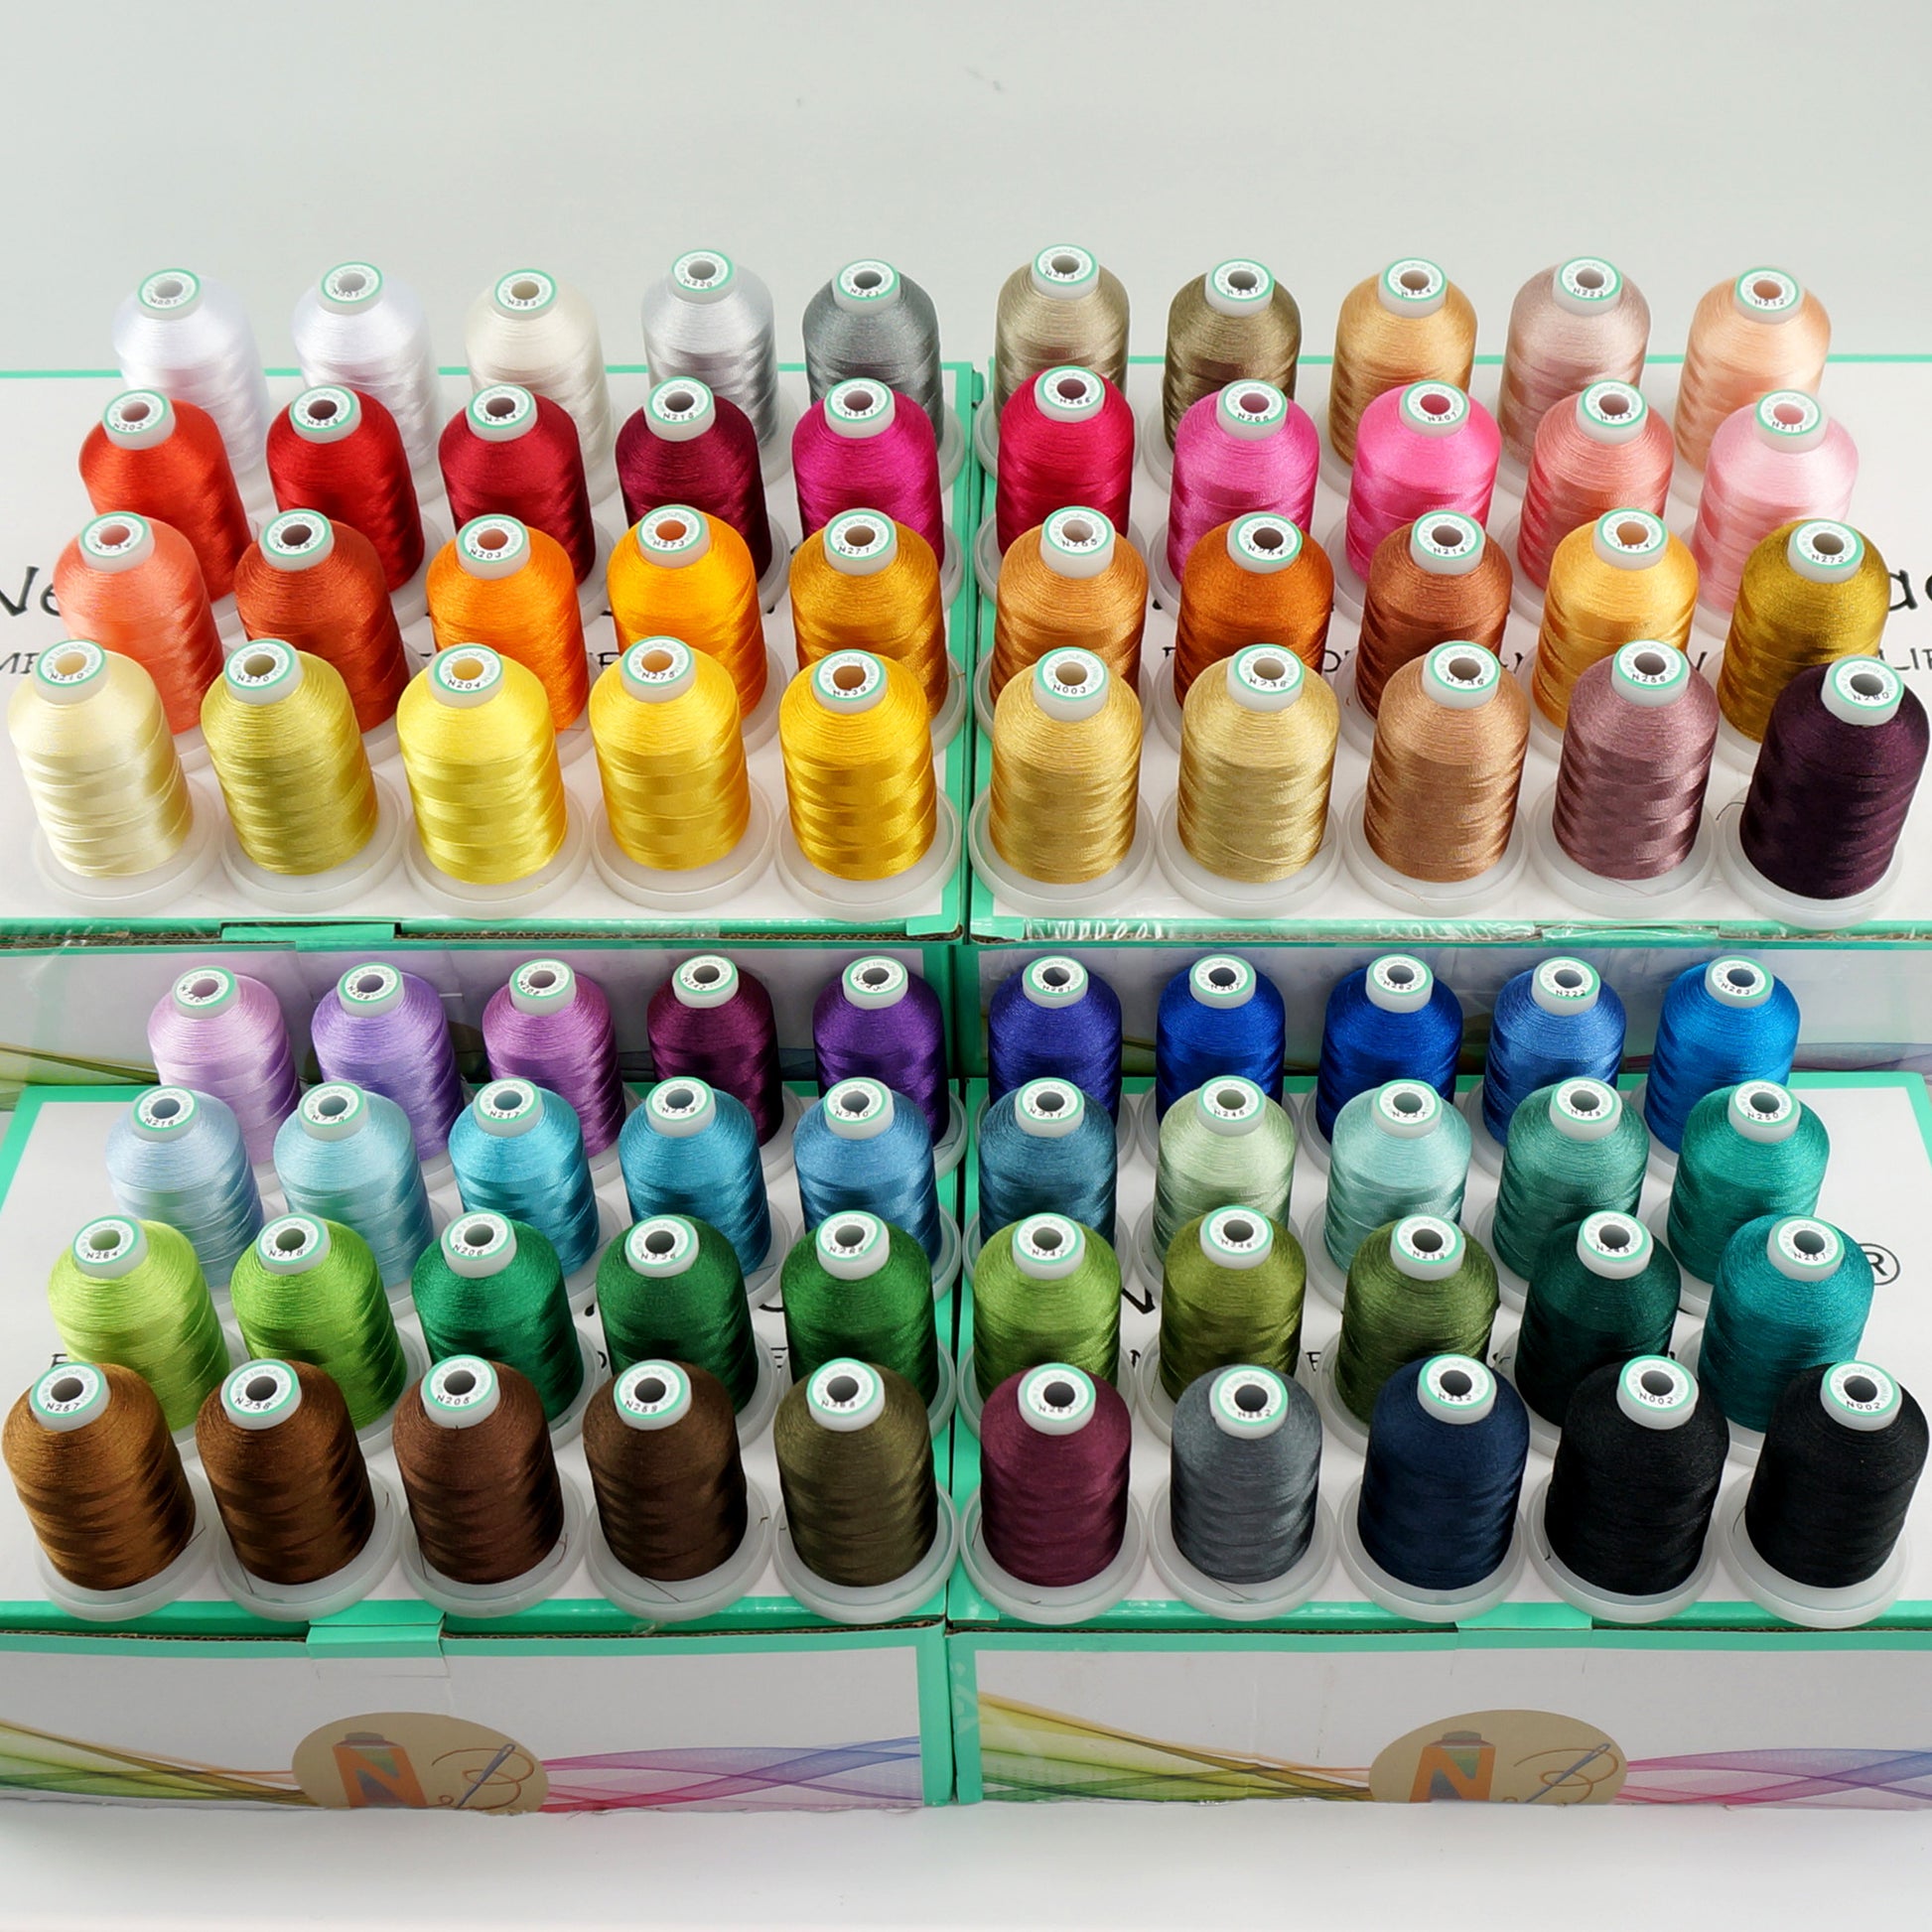 Simthread Polyester Embroidery Thread, 80 Spools 80 Janome Color